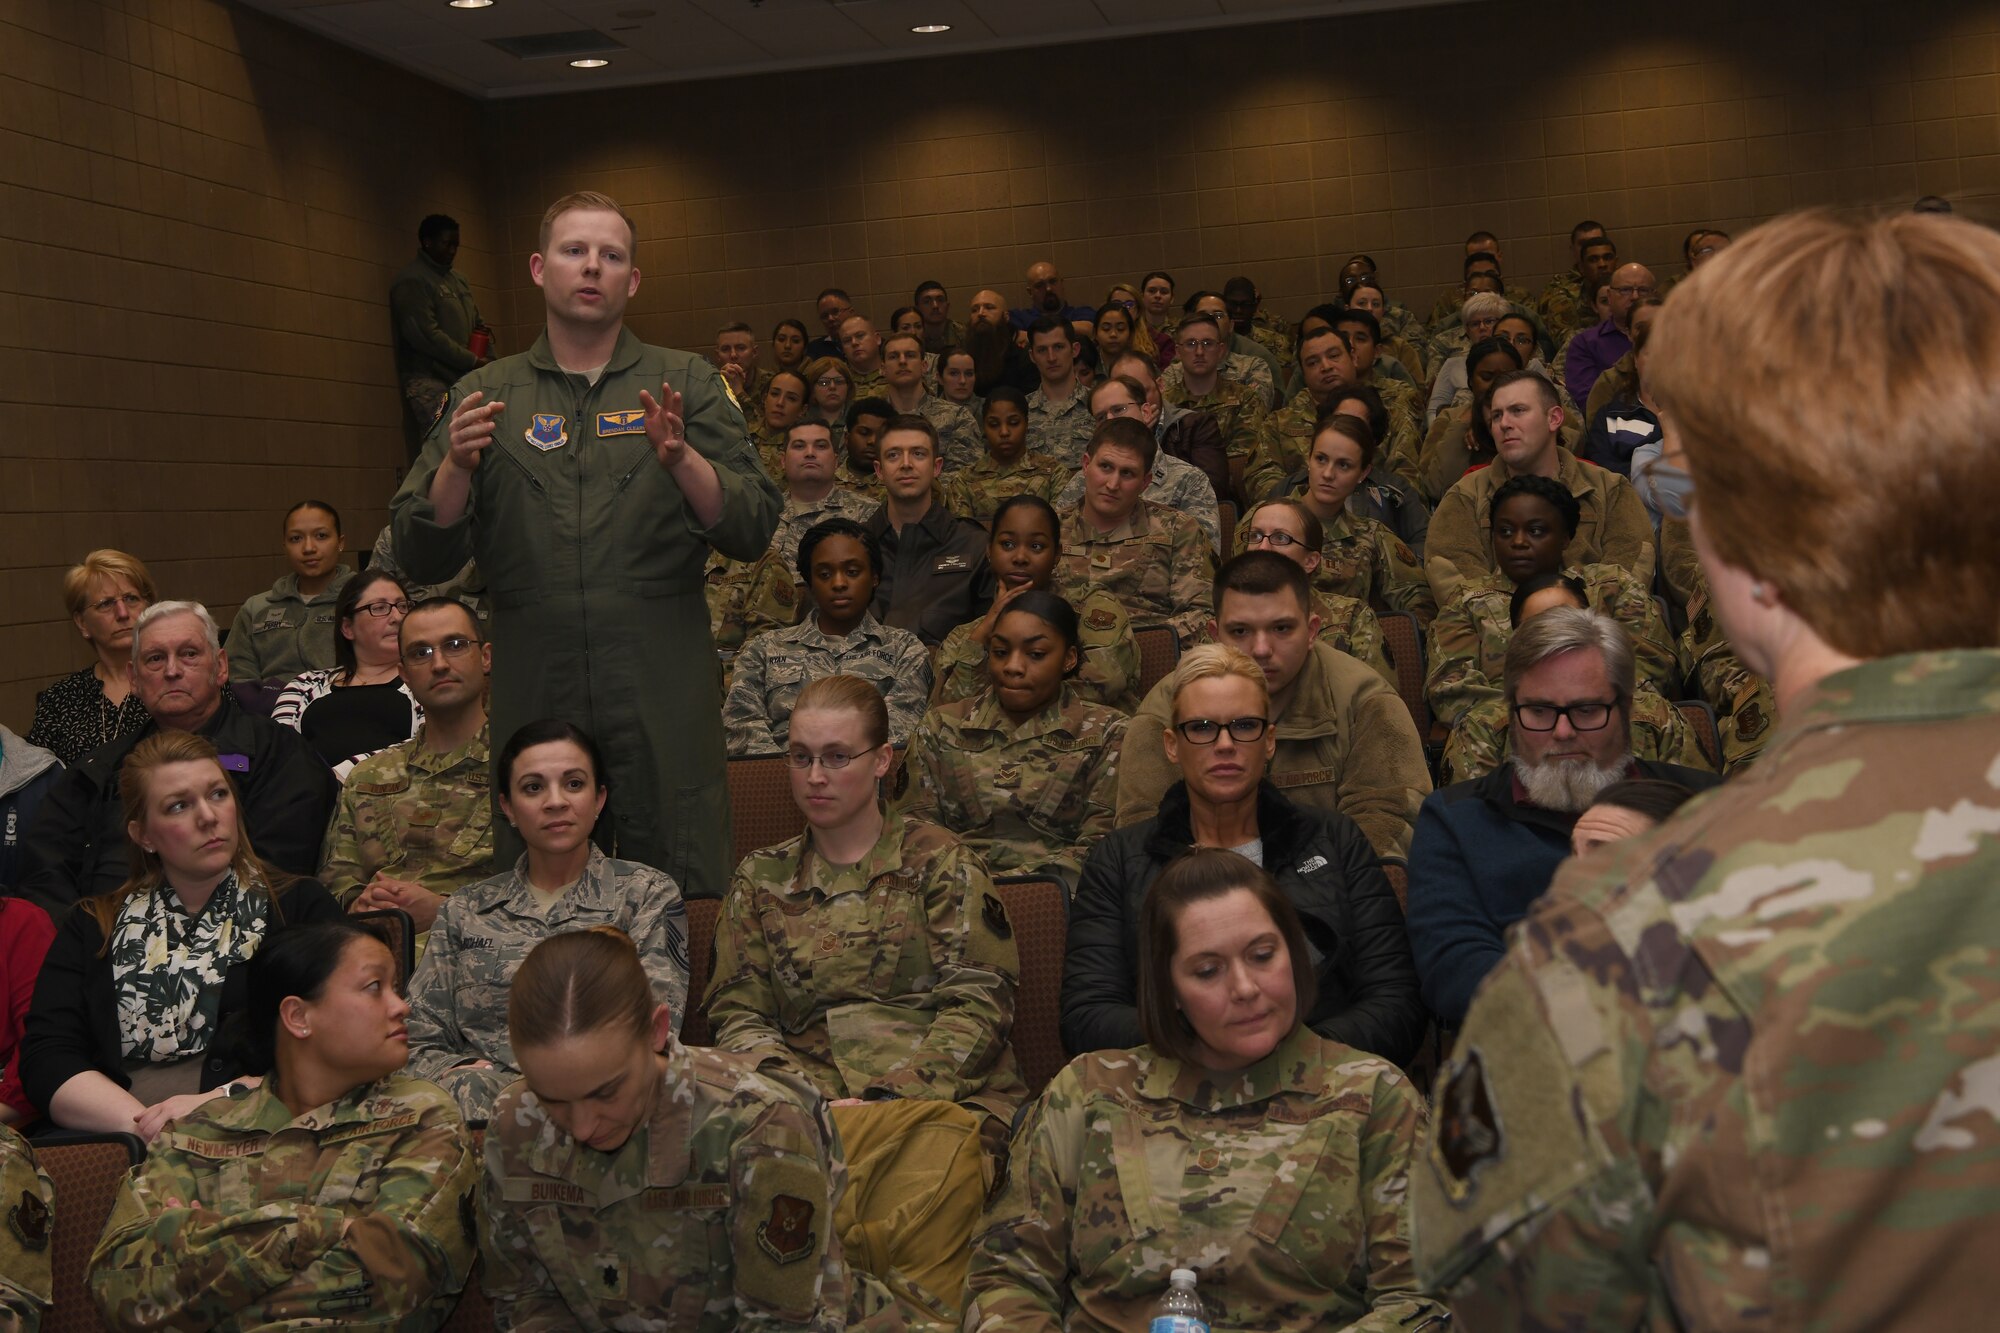 Lt. Gen. Dorothy Hogg, the Air Force surgeon general, is asked a question by a medic with the 28th Medical Group, at Ellsworth Air Force Base, S.D., Jan. 30, 2019. Her visit was focused on understanding the critical role the 28th MDG has in U.S. combat airpower operations. (U.S. Air Force photo by Senior Airman Nicolas Z. Erwin)